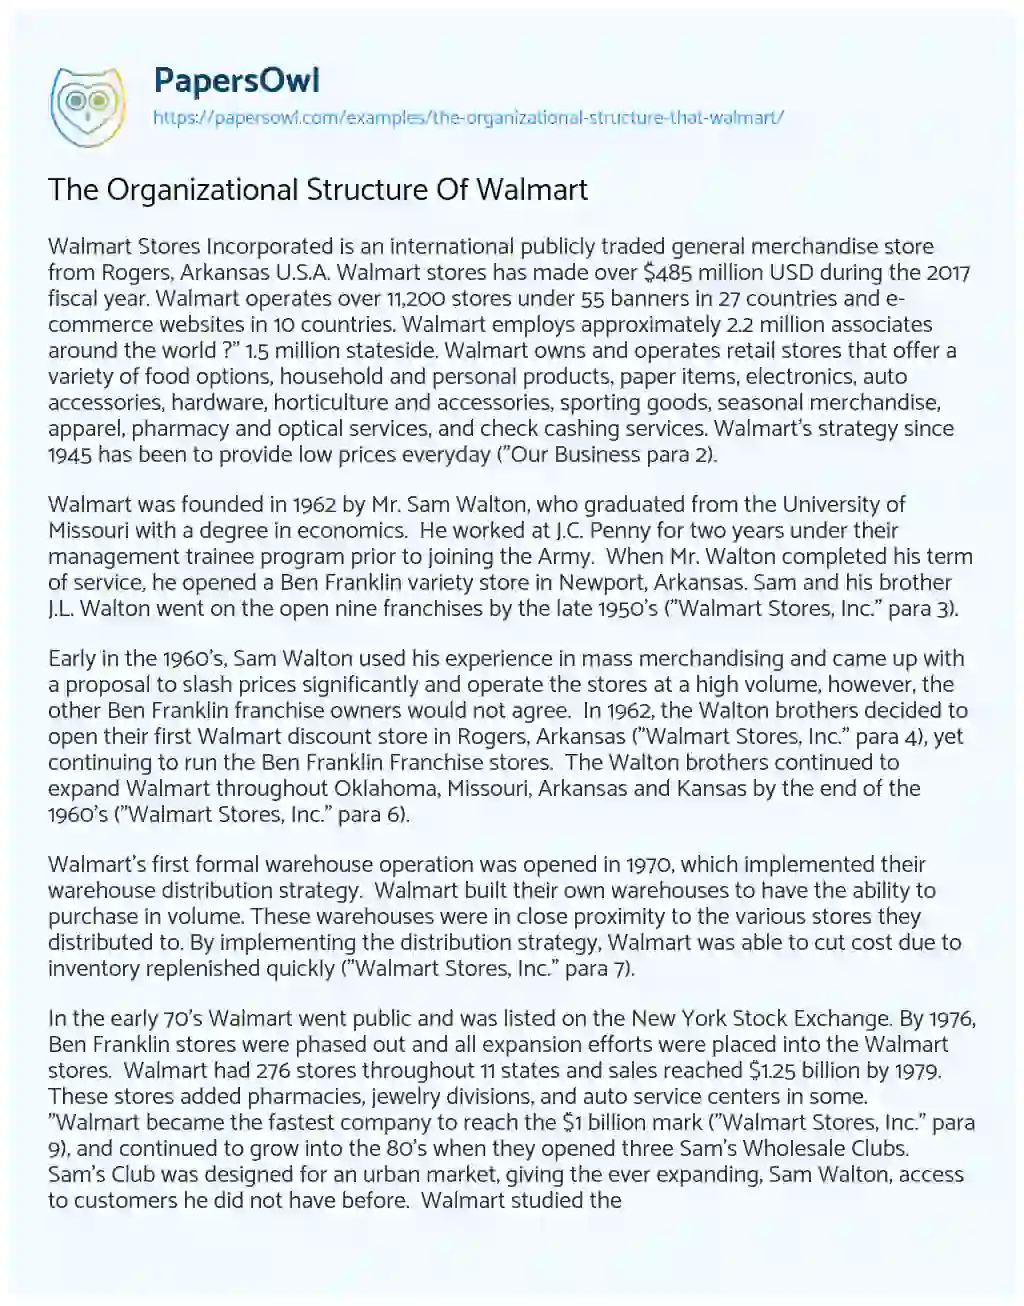 Essay on The Organizational Structure of Walmart